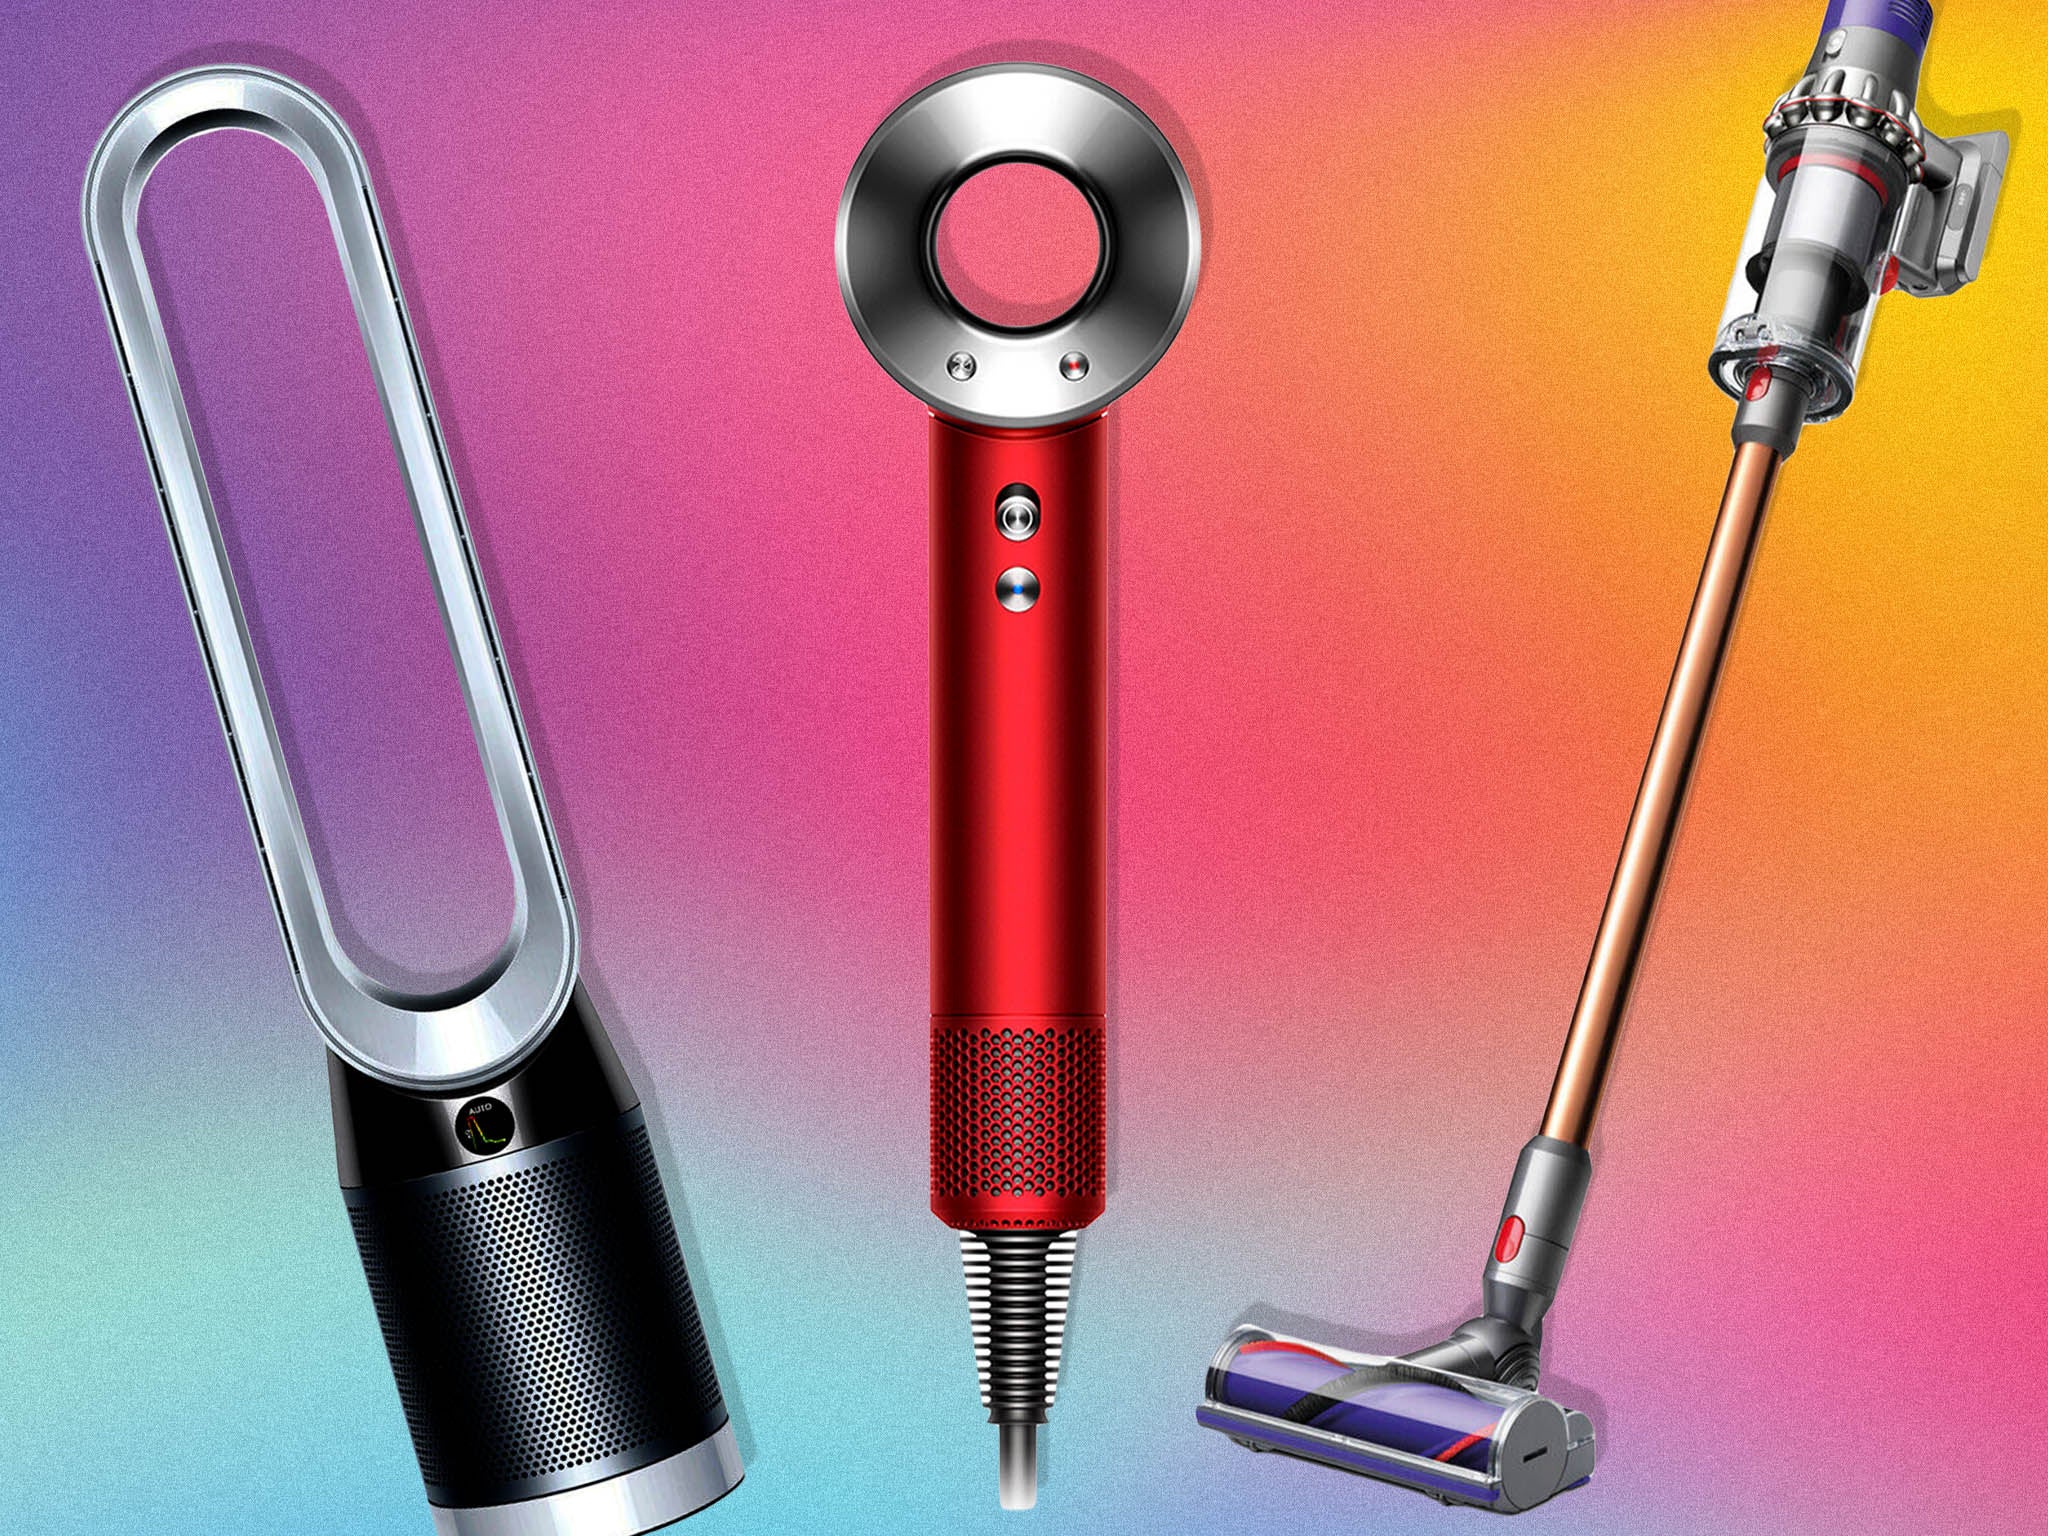 Dyson sale on eBay: Save 20% on the hair dryer and more | The Independent